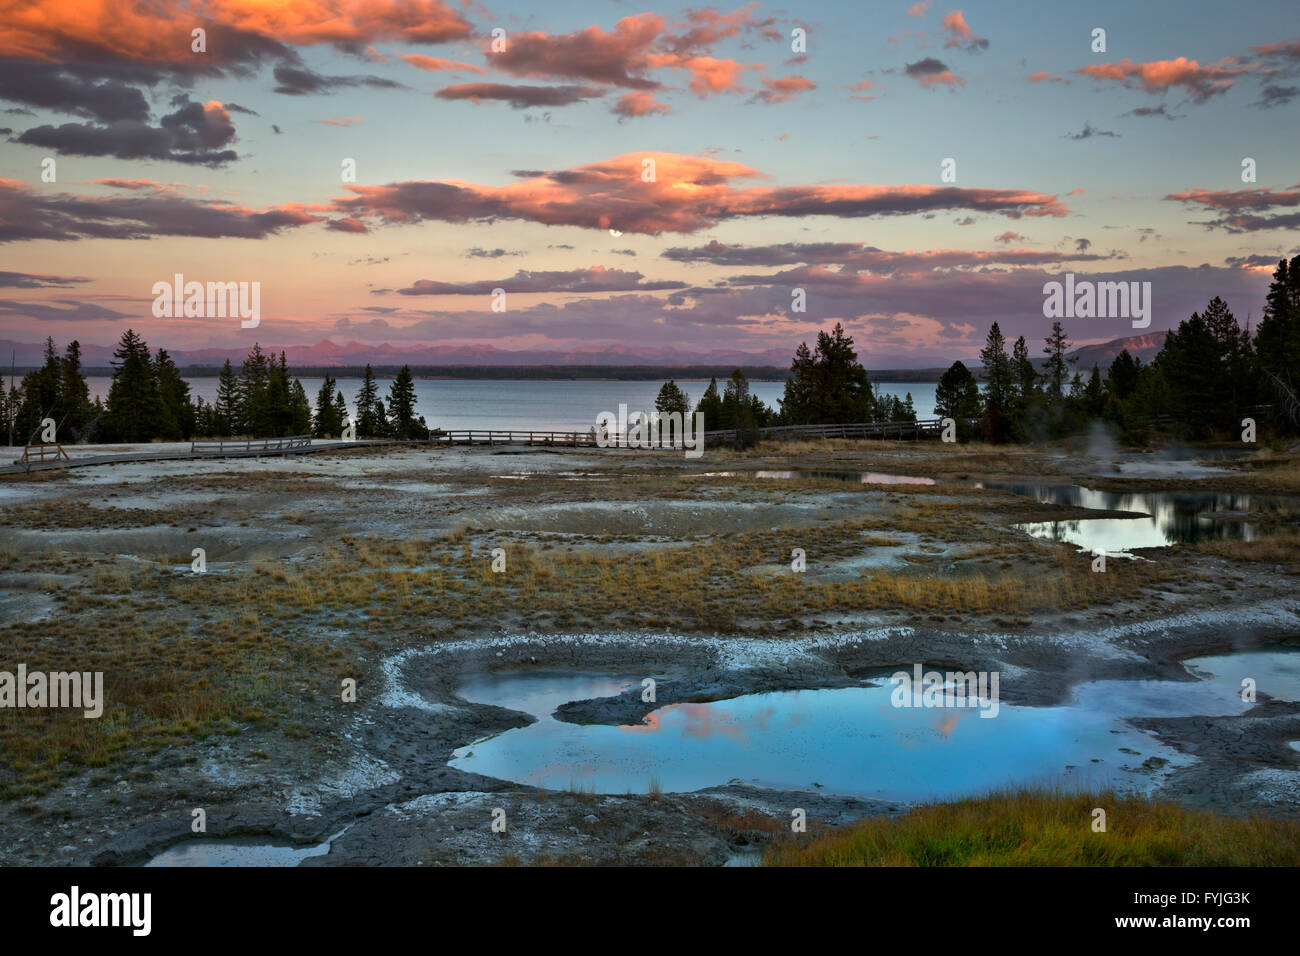 WYOMING - Clouds reflecting in hot spring pools at sunset in the West Thumb Geyser Basin of Yellowstone National Park. Stock Photo